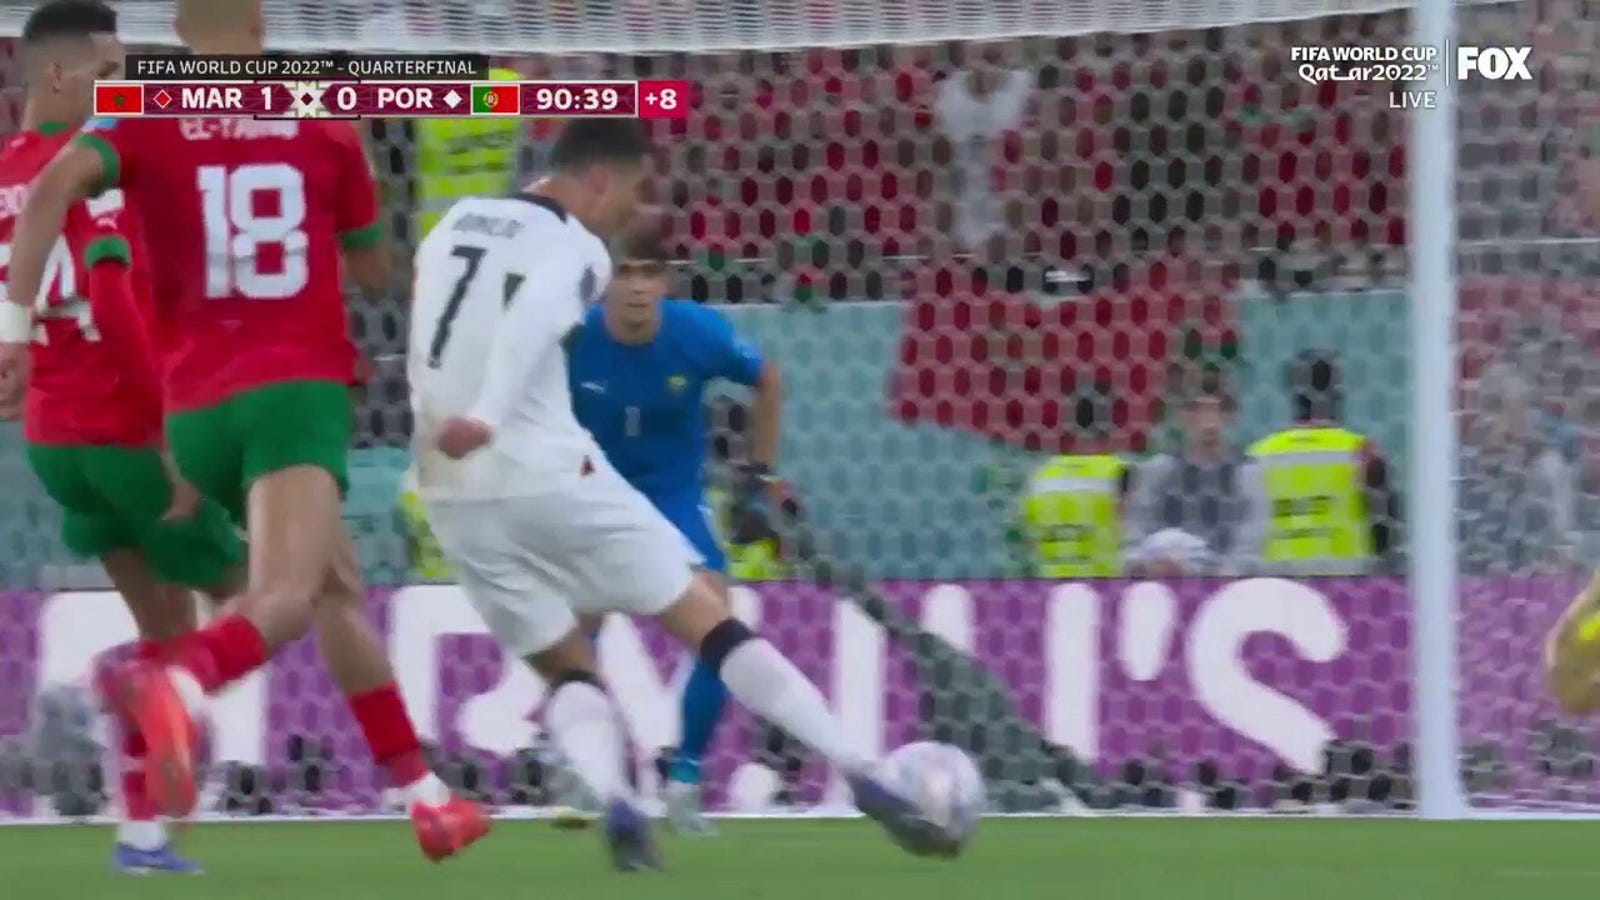 Cristiano Ronaldo came close to tying it up